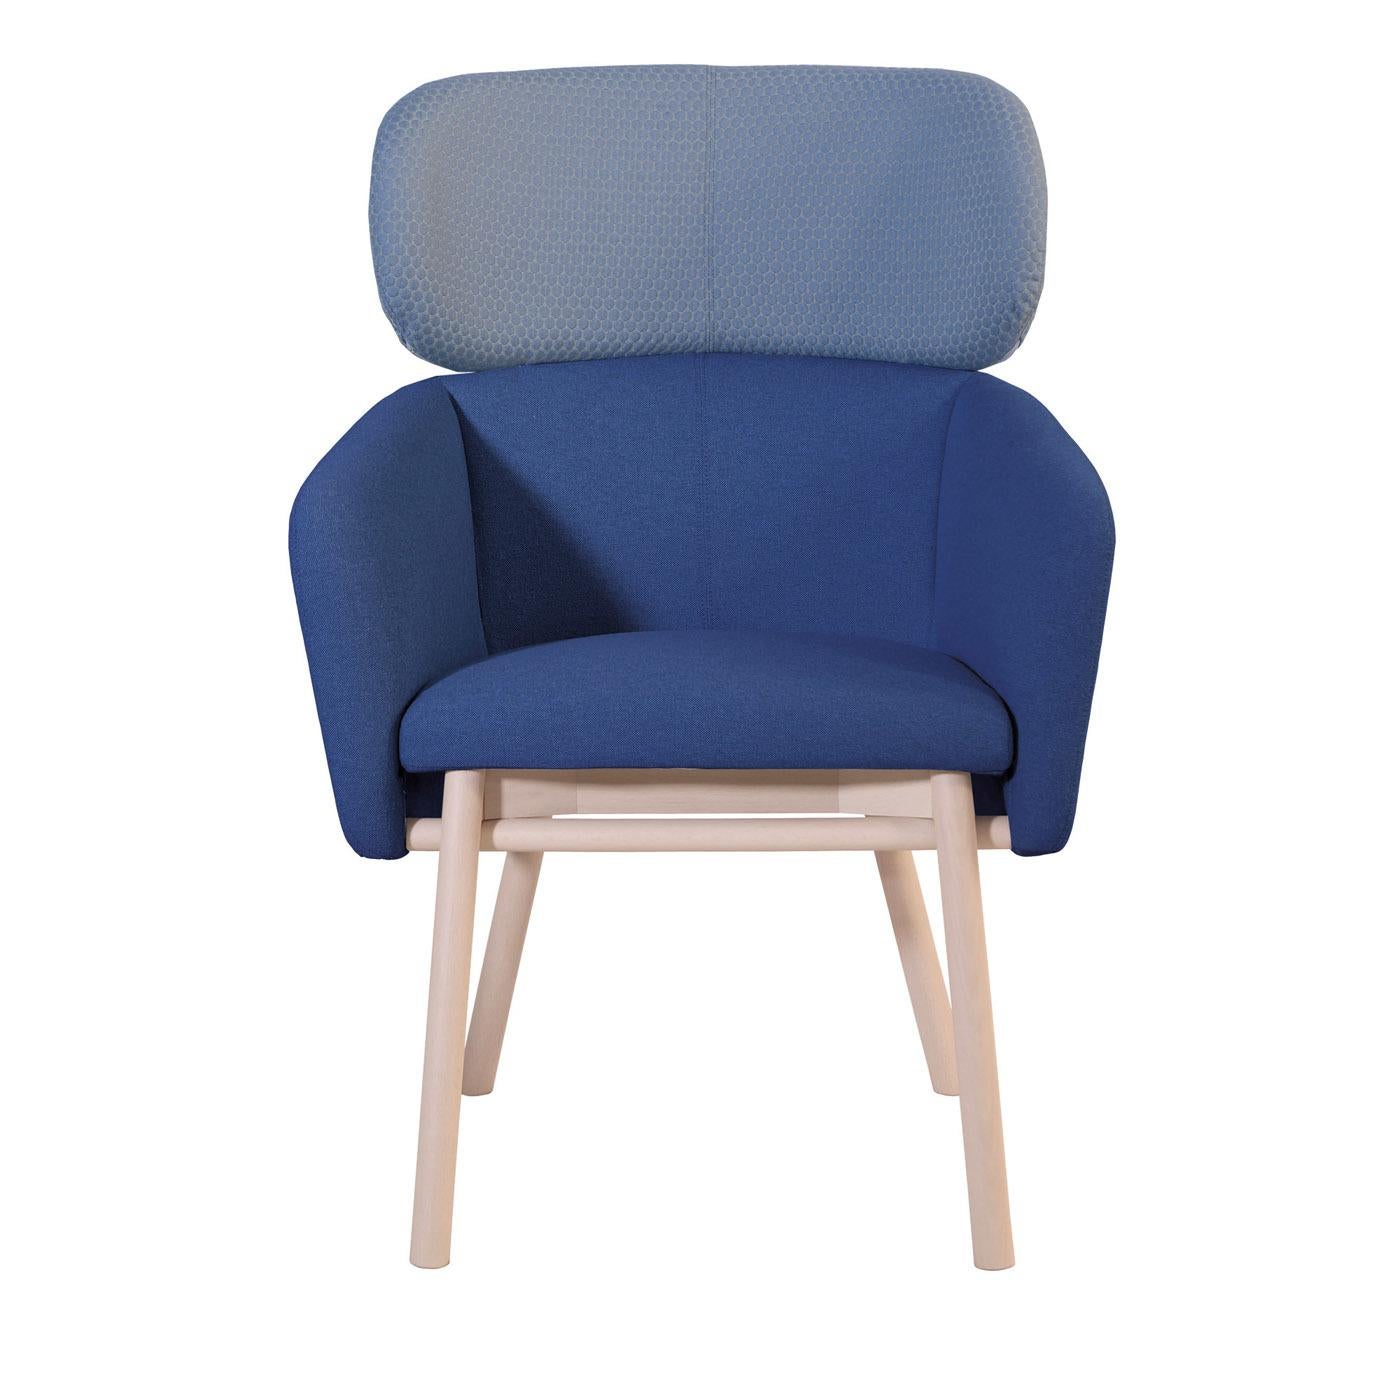 Italian Balù Extra Large Blue and Lightblue Chair by Emilio Nanni For Sale